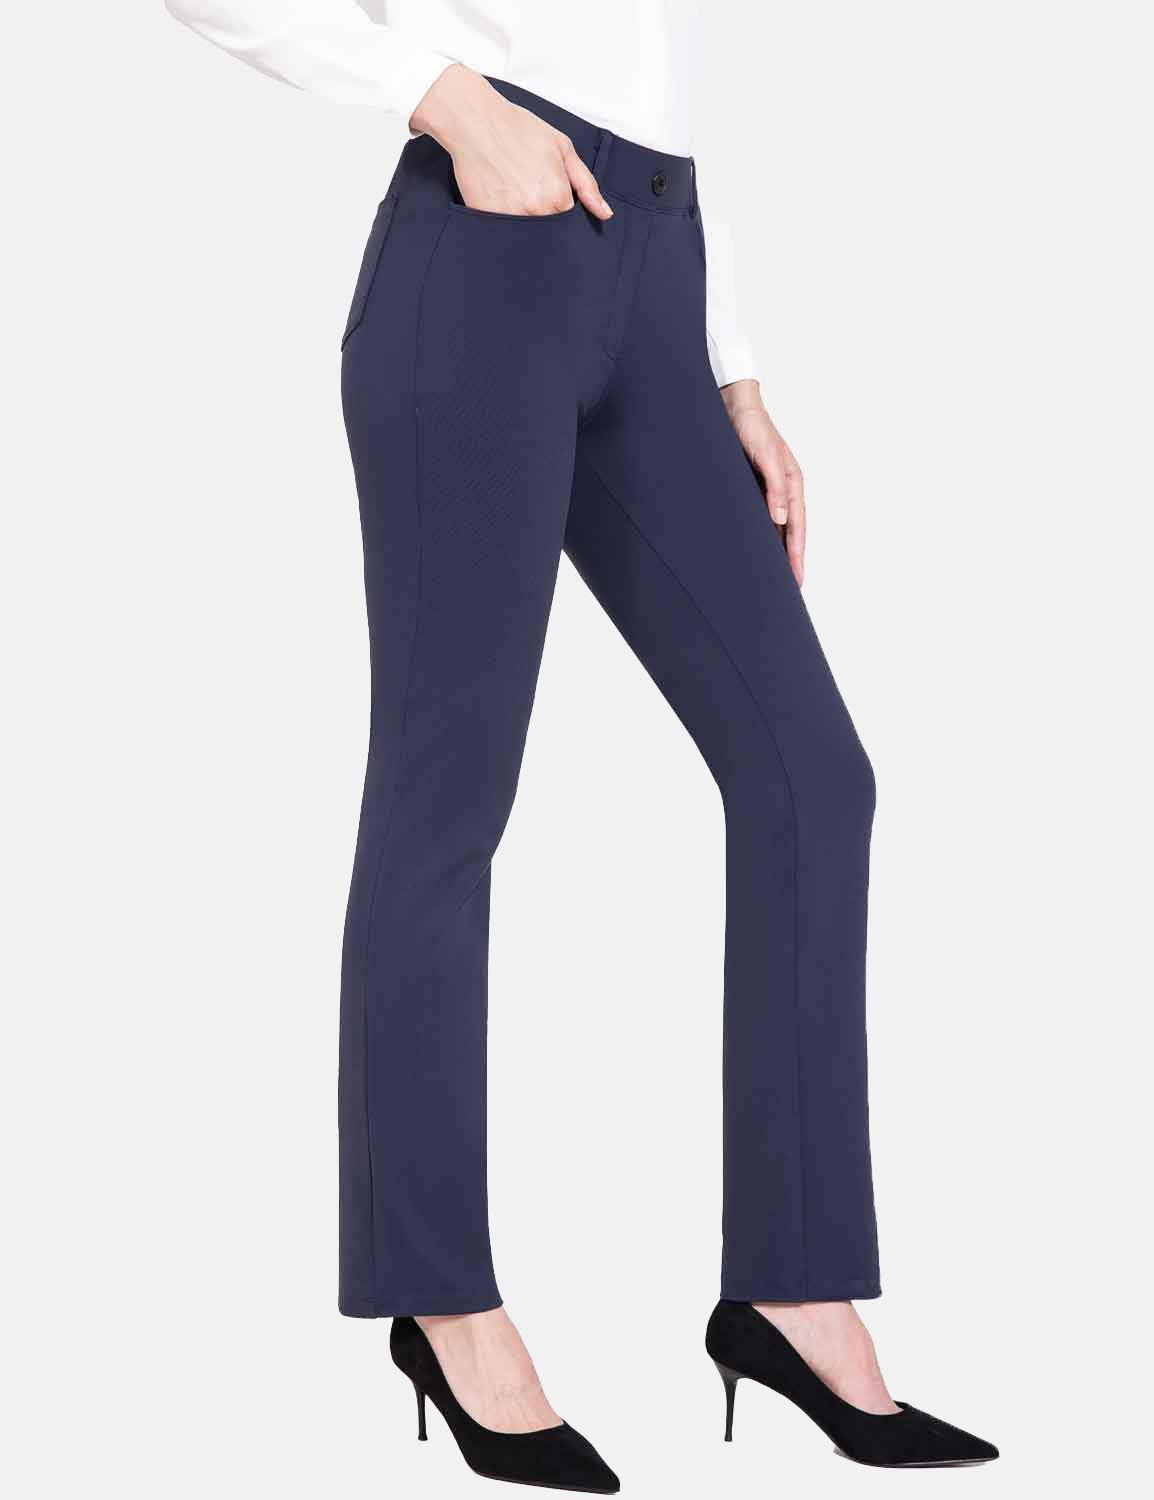 BALEAF Womens High Waisted Leggings Pants With Pockets With Pockets  Straight Leg Slim Fit For Casual Workouts 29/32 Inches From Brickmenh,  $19.06